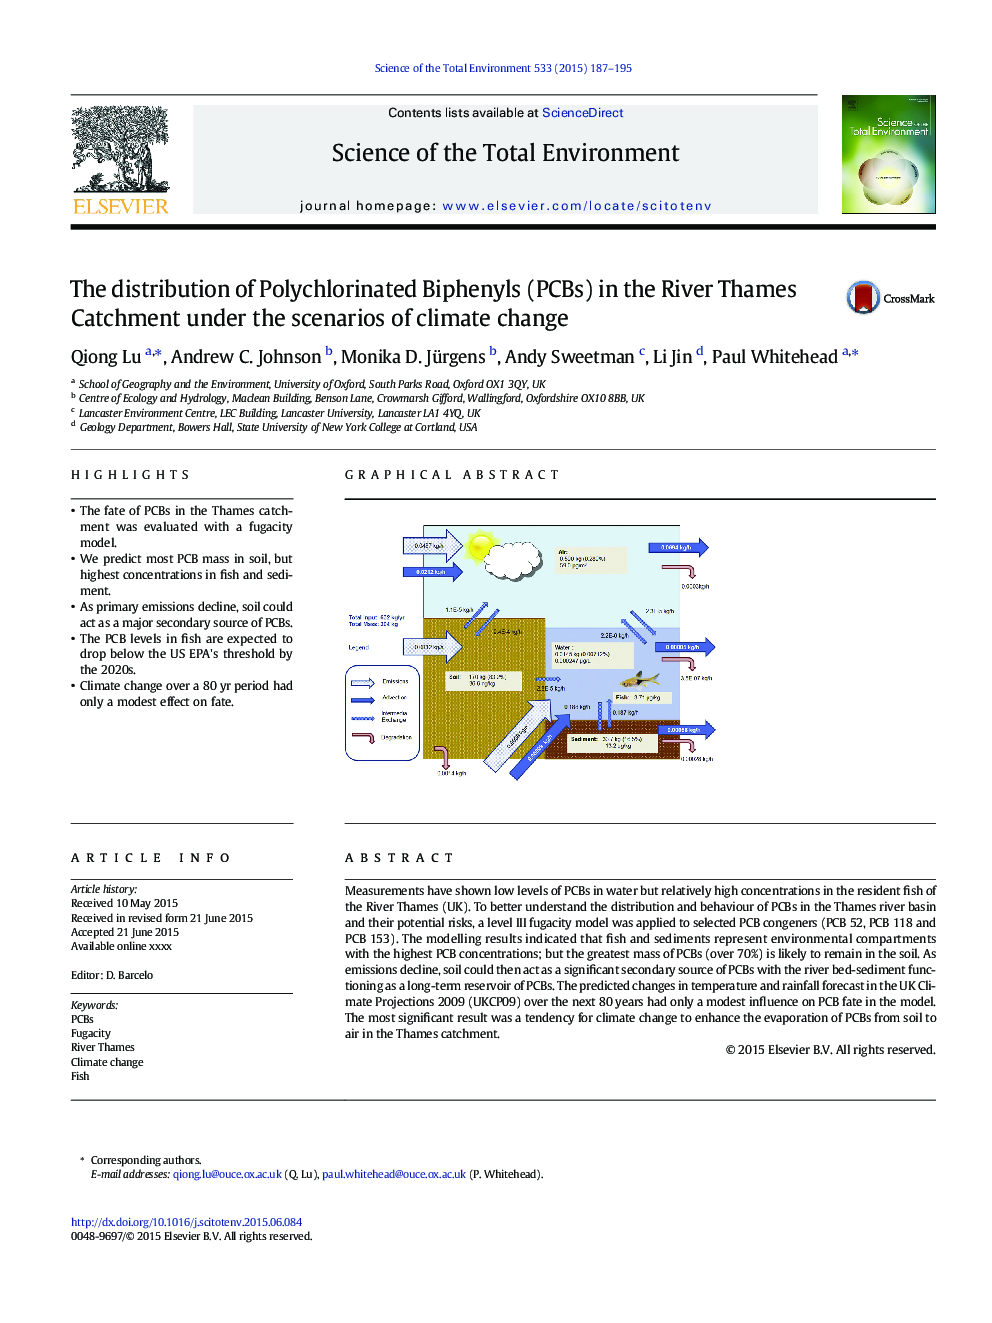 The distribution of Polychlorinated Biphenyls (PCBs) in the River Thames Catchment under the scenarios of climate change